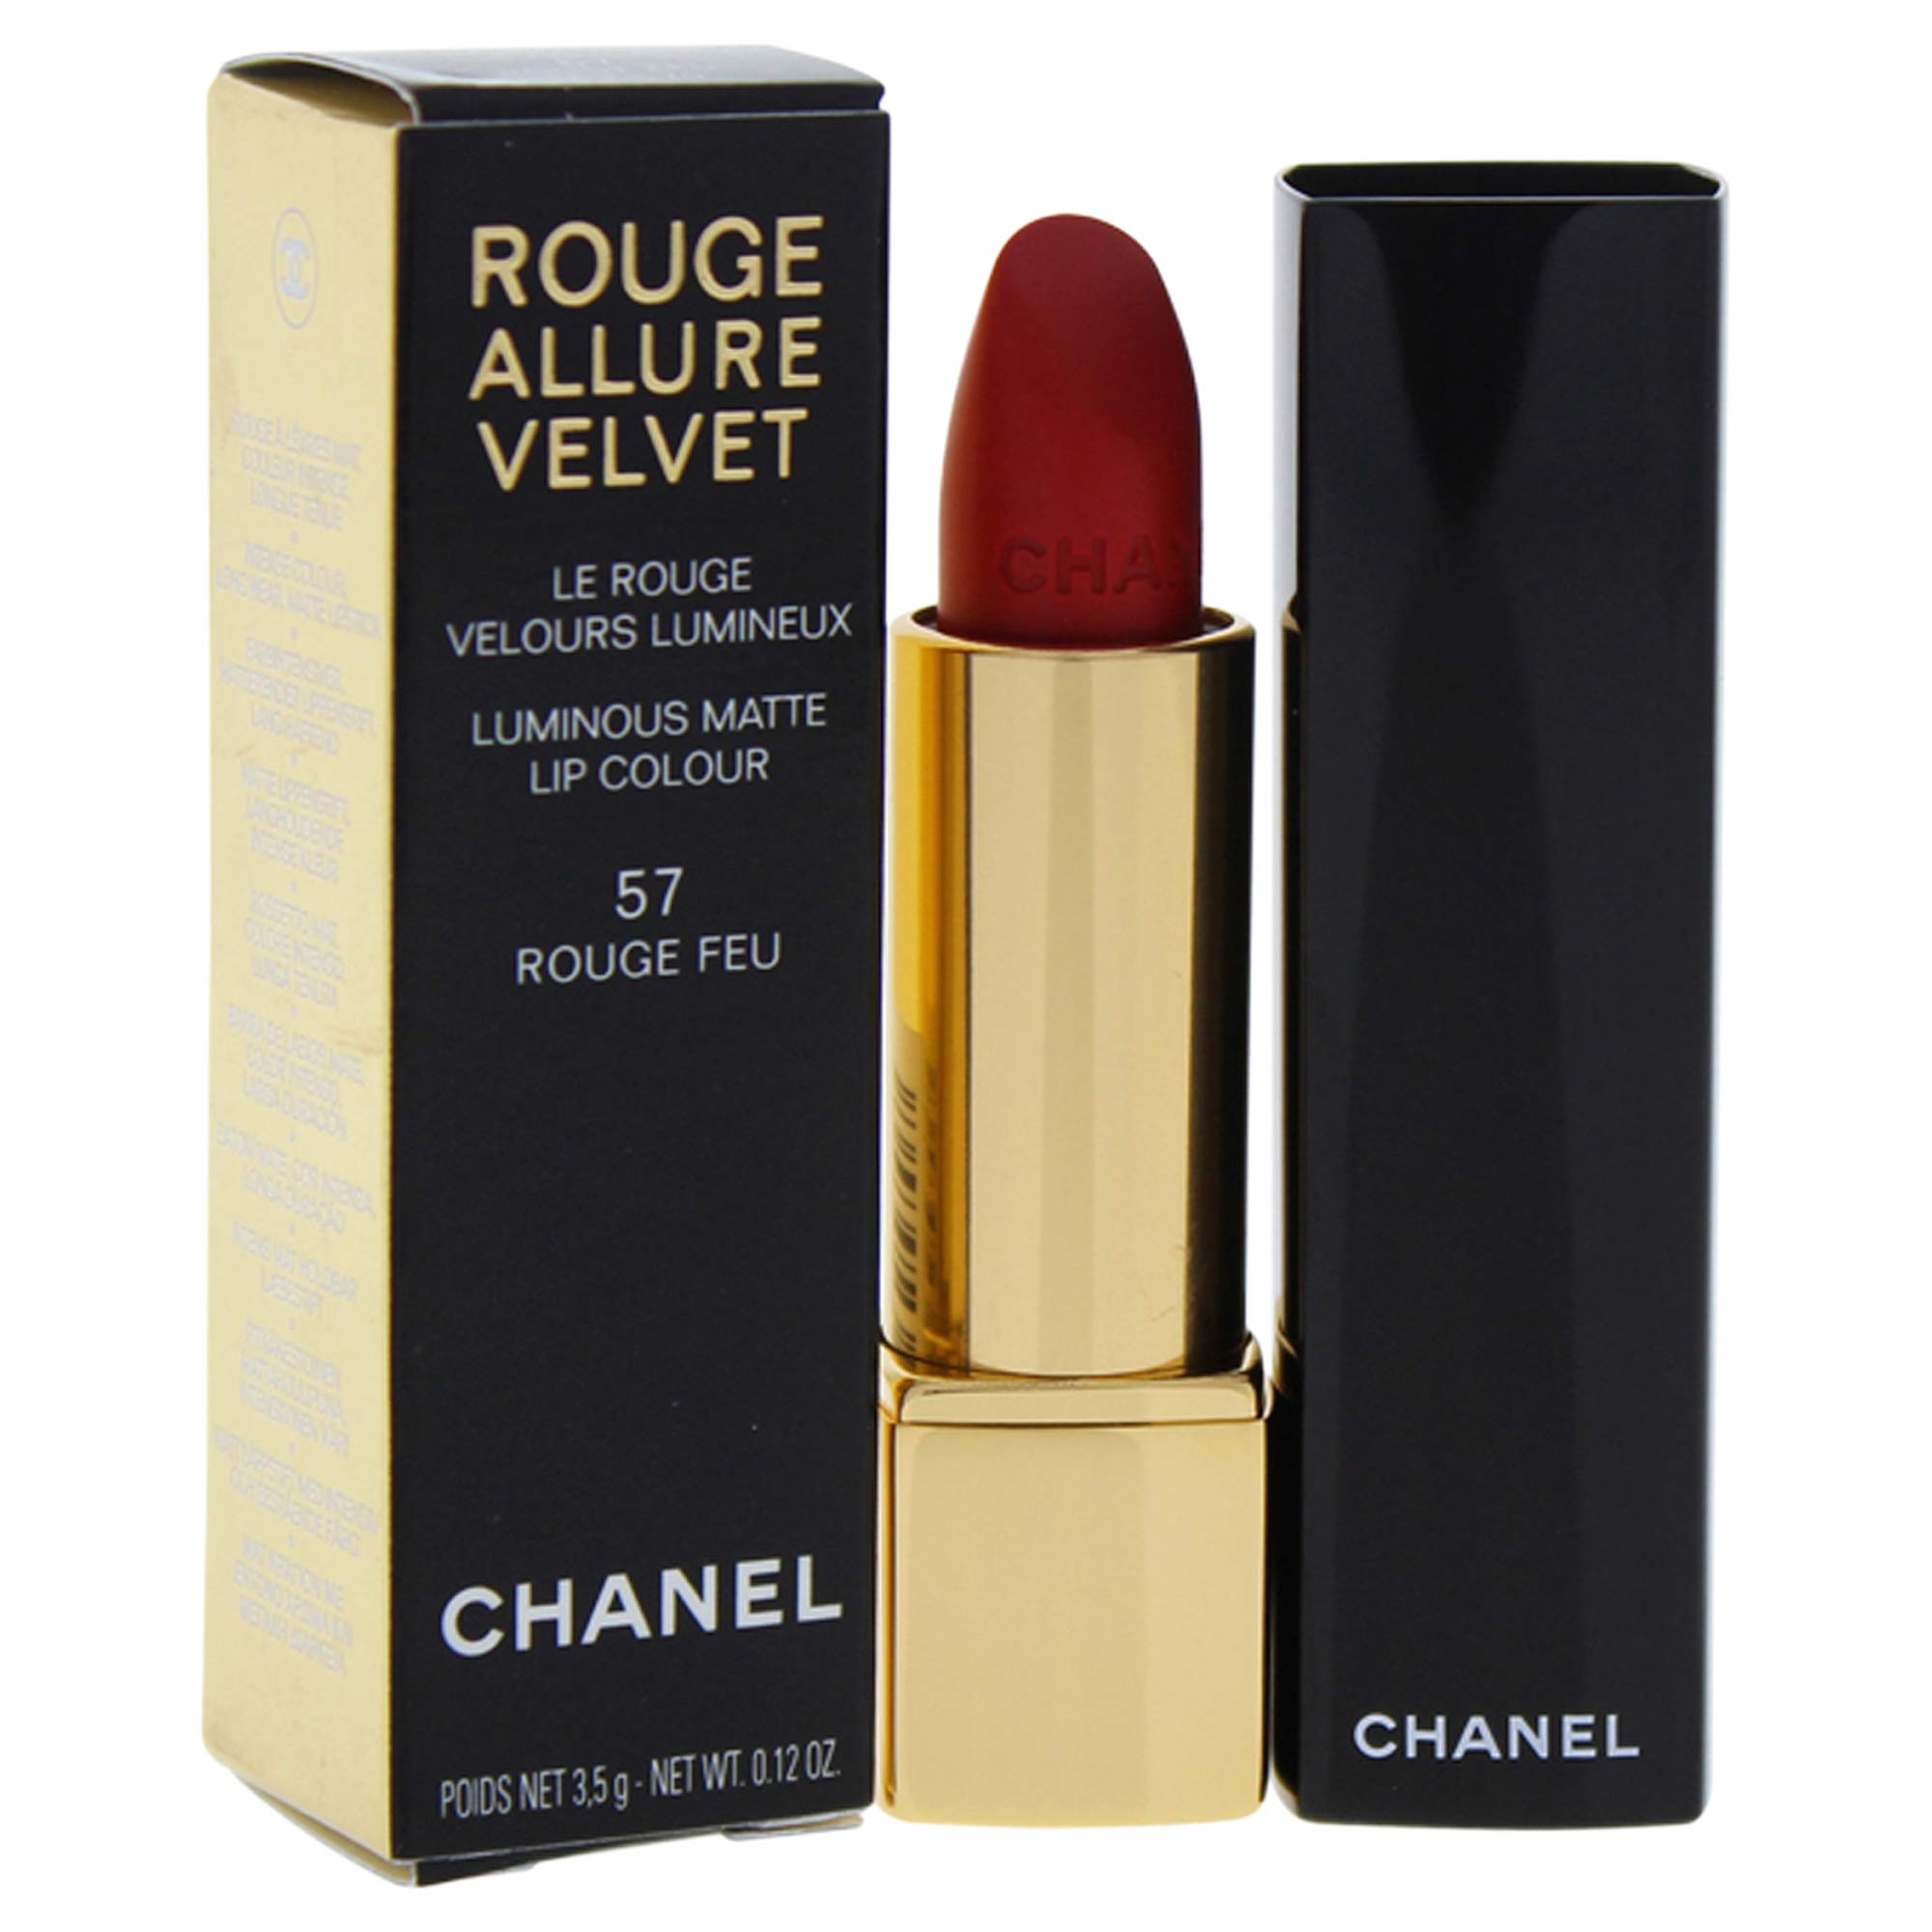 Chanel Rouge Allure Velvet  Lipstick Review  Swatches